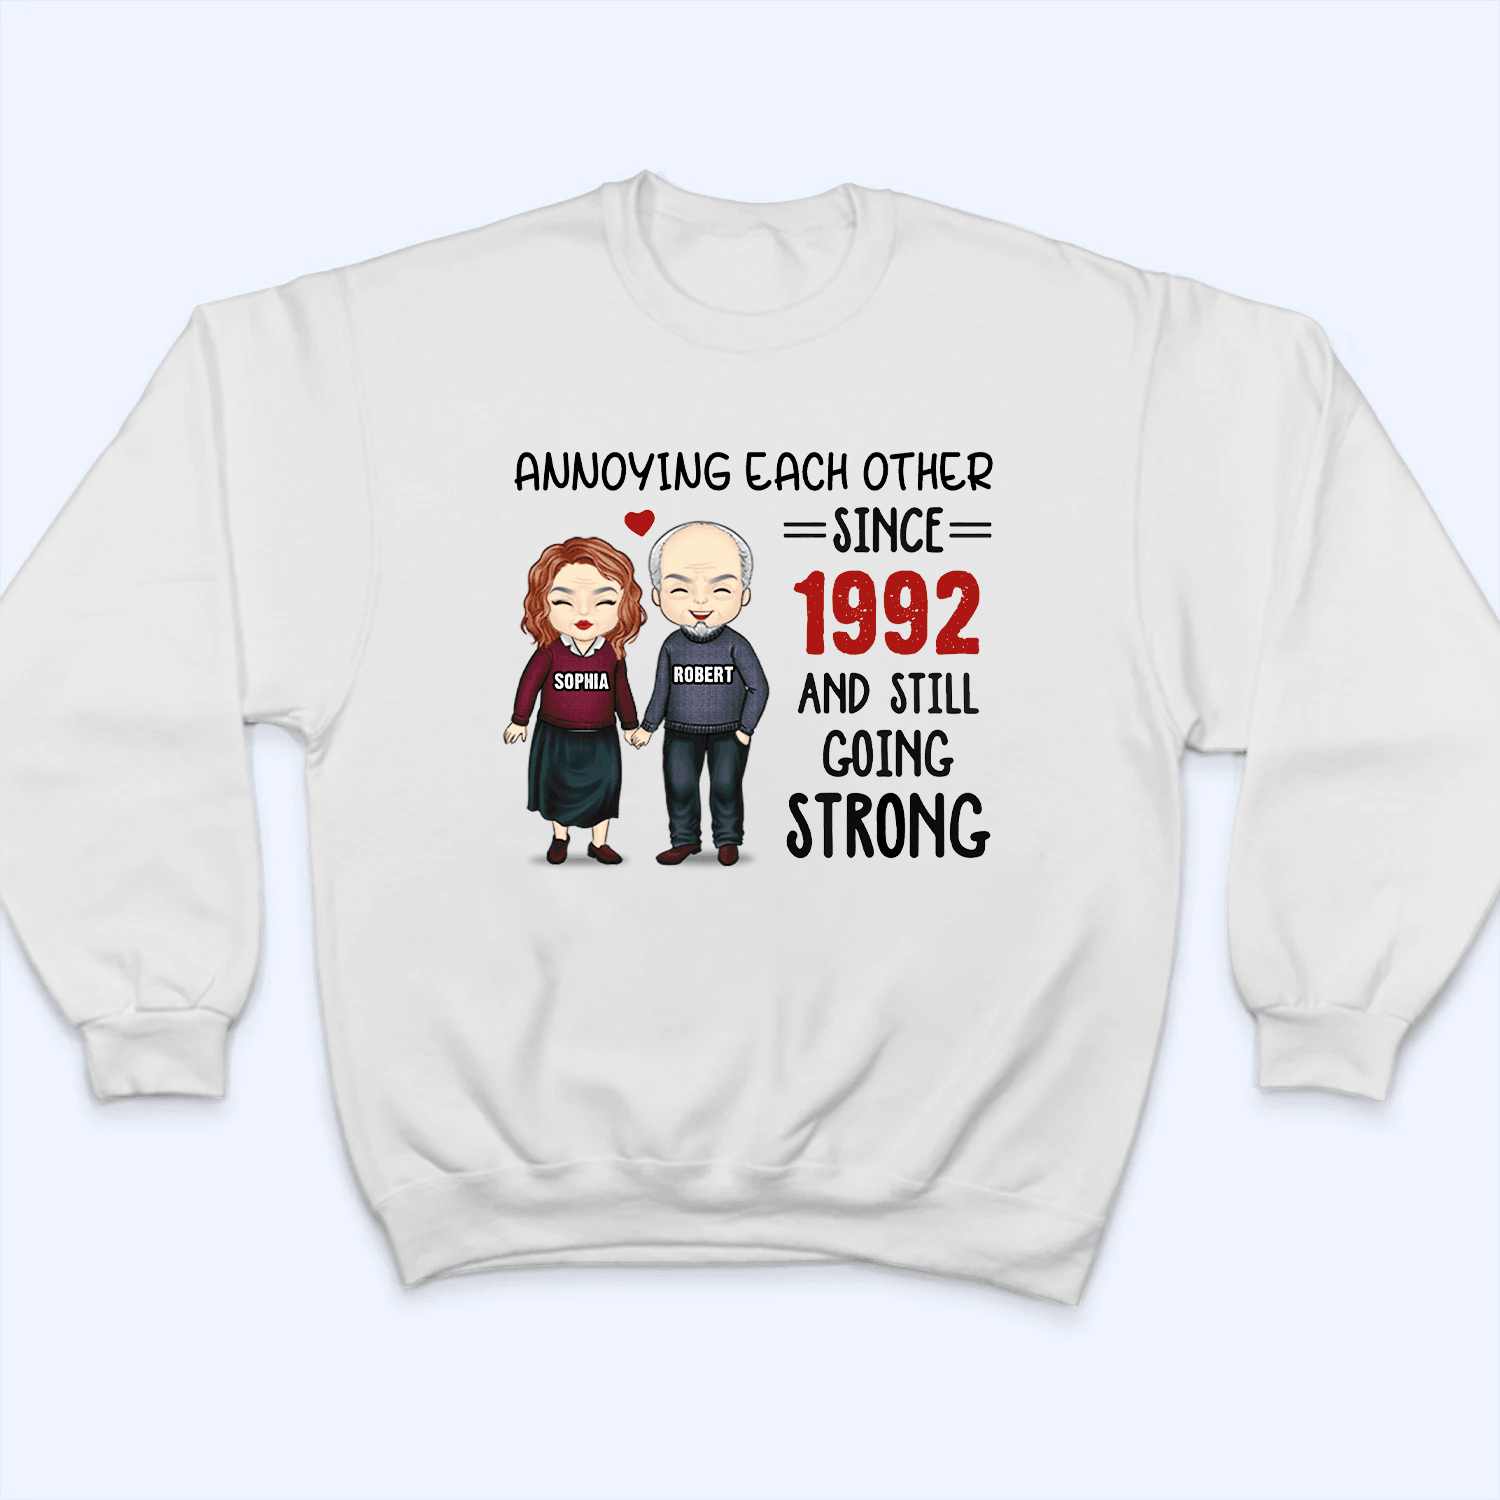 Annoying Each Other, Still Going Strong - Personalized Custom T Shirt - Gift For Boyfriend, Girlfriend, Her, Him, Couples | Best for Anniversary, Valentine, Engagement